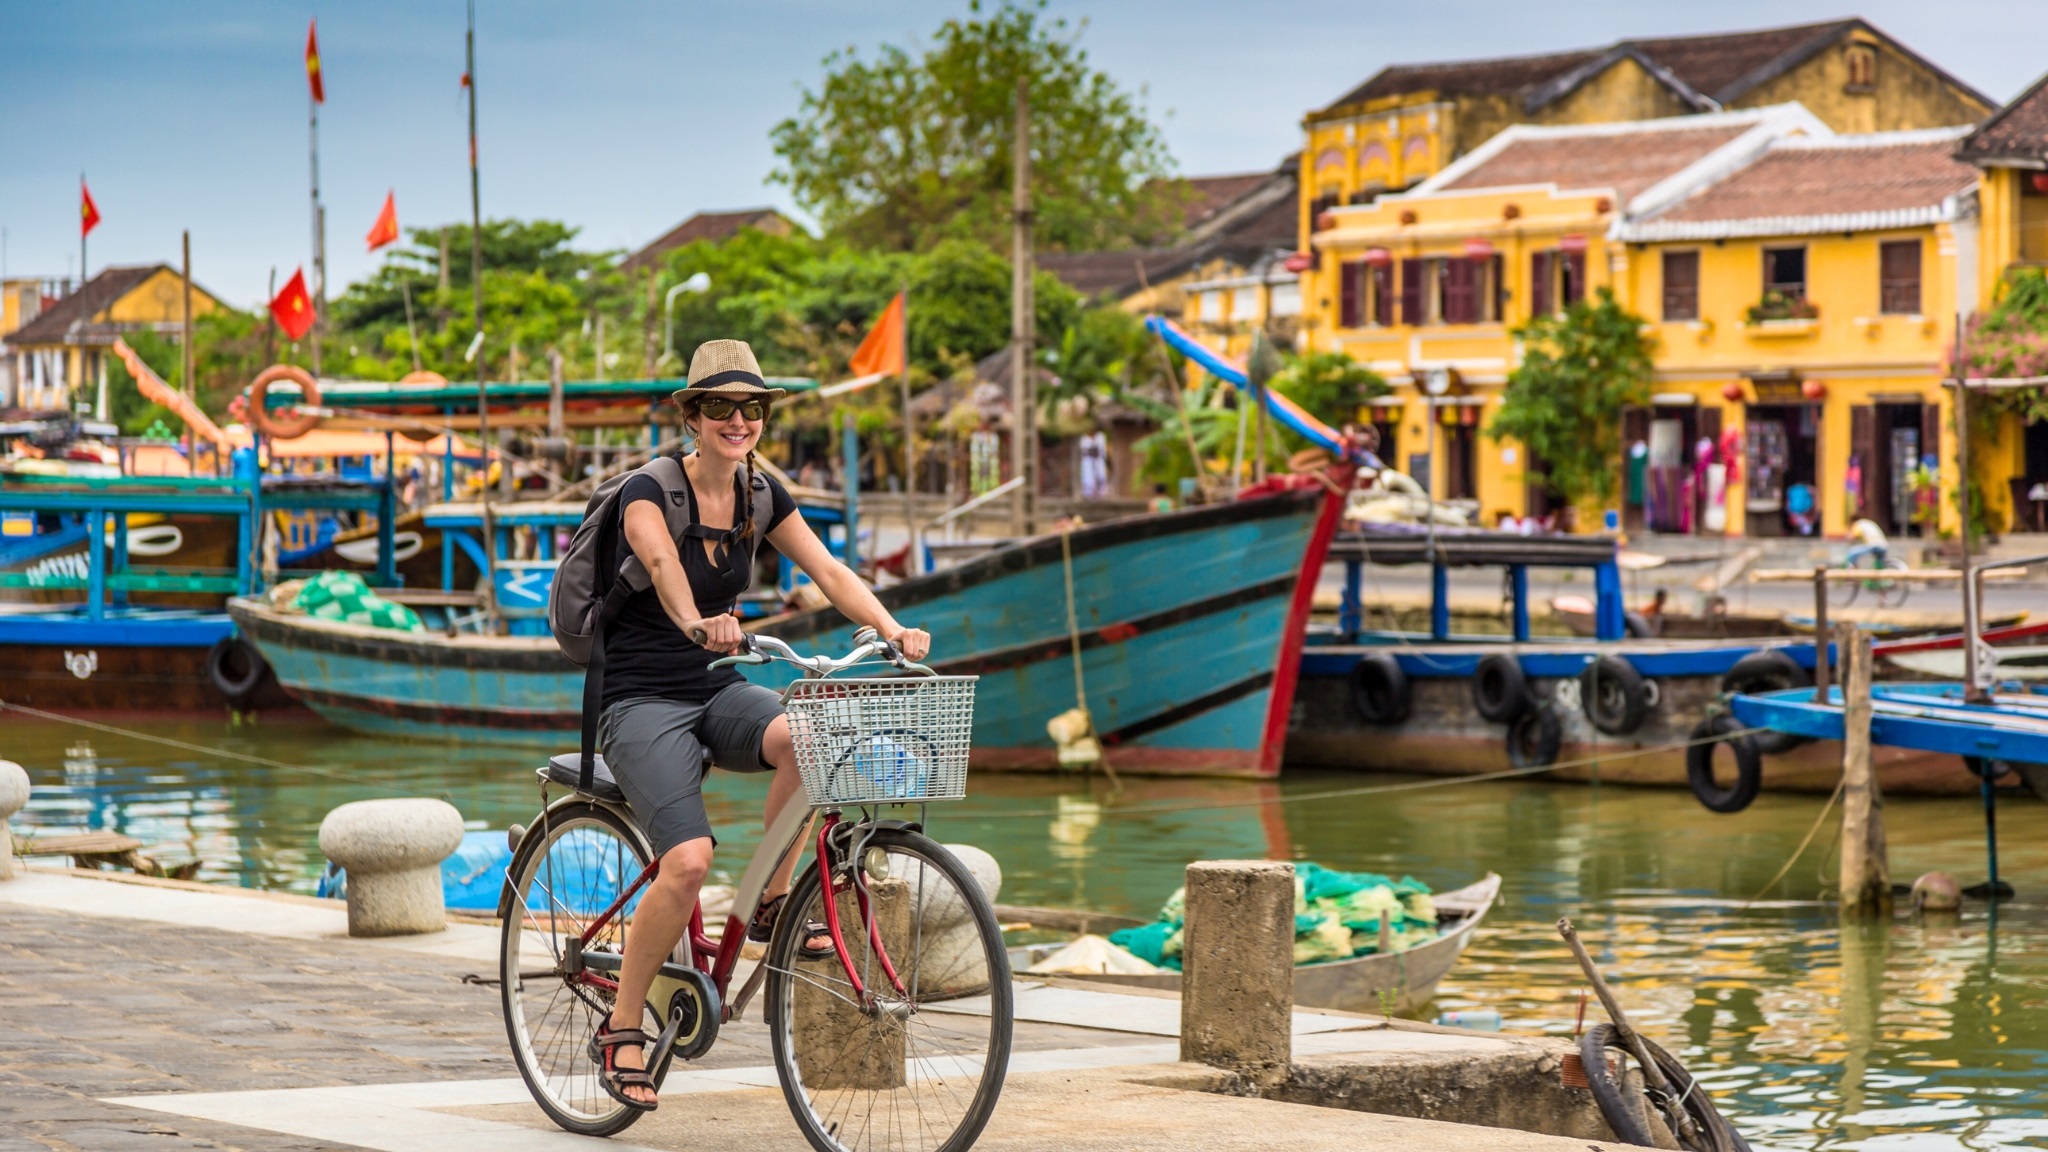 Cycle In Hoi An Ancient Town